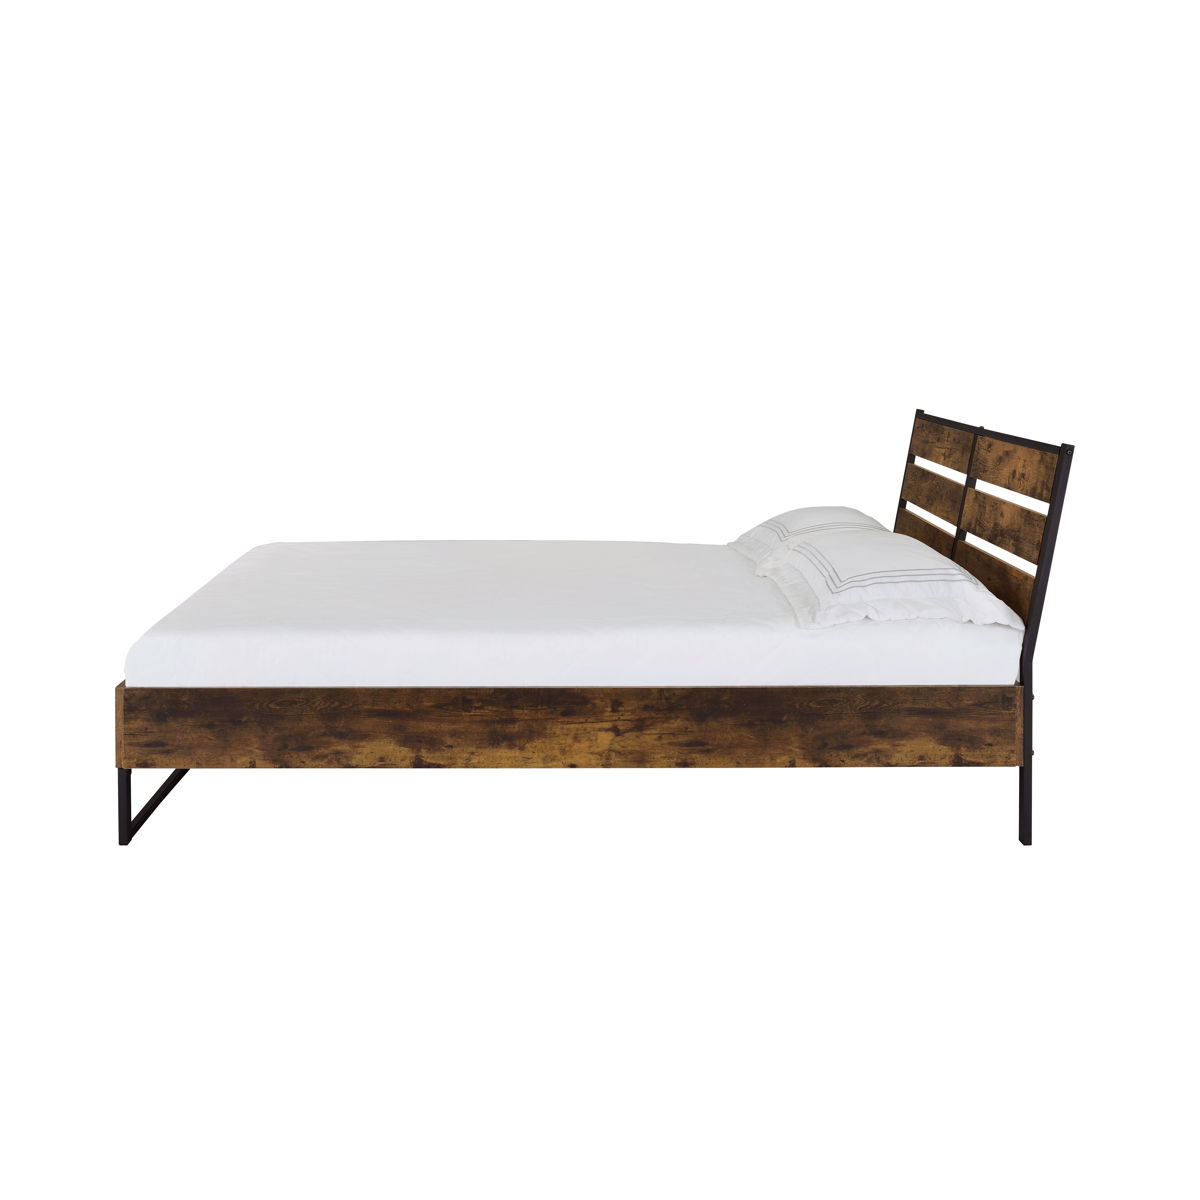 Juvanth - Bed - Tony's Home Furnishings